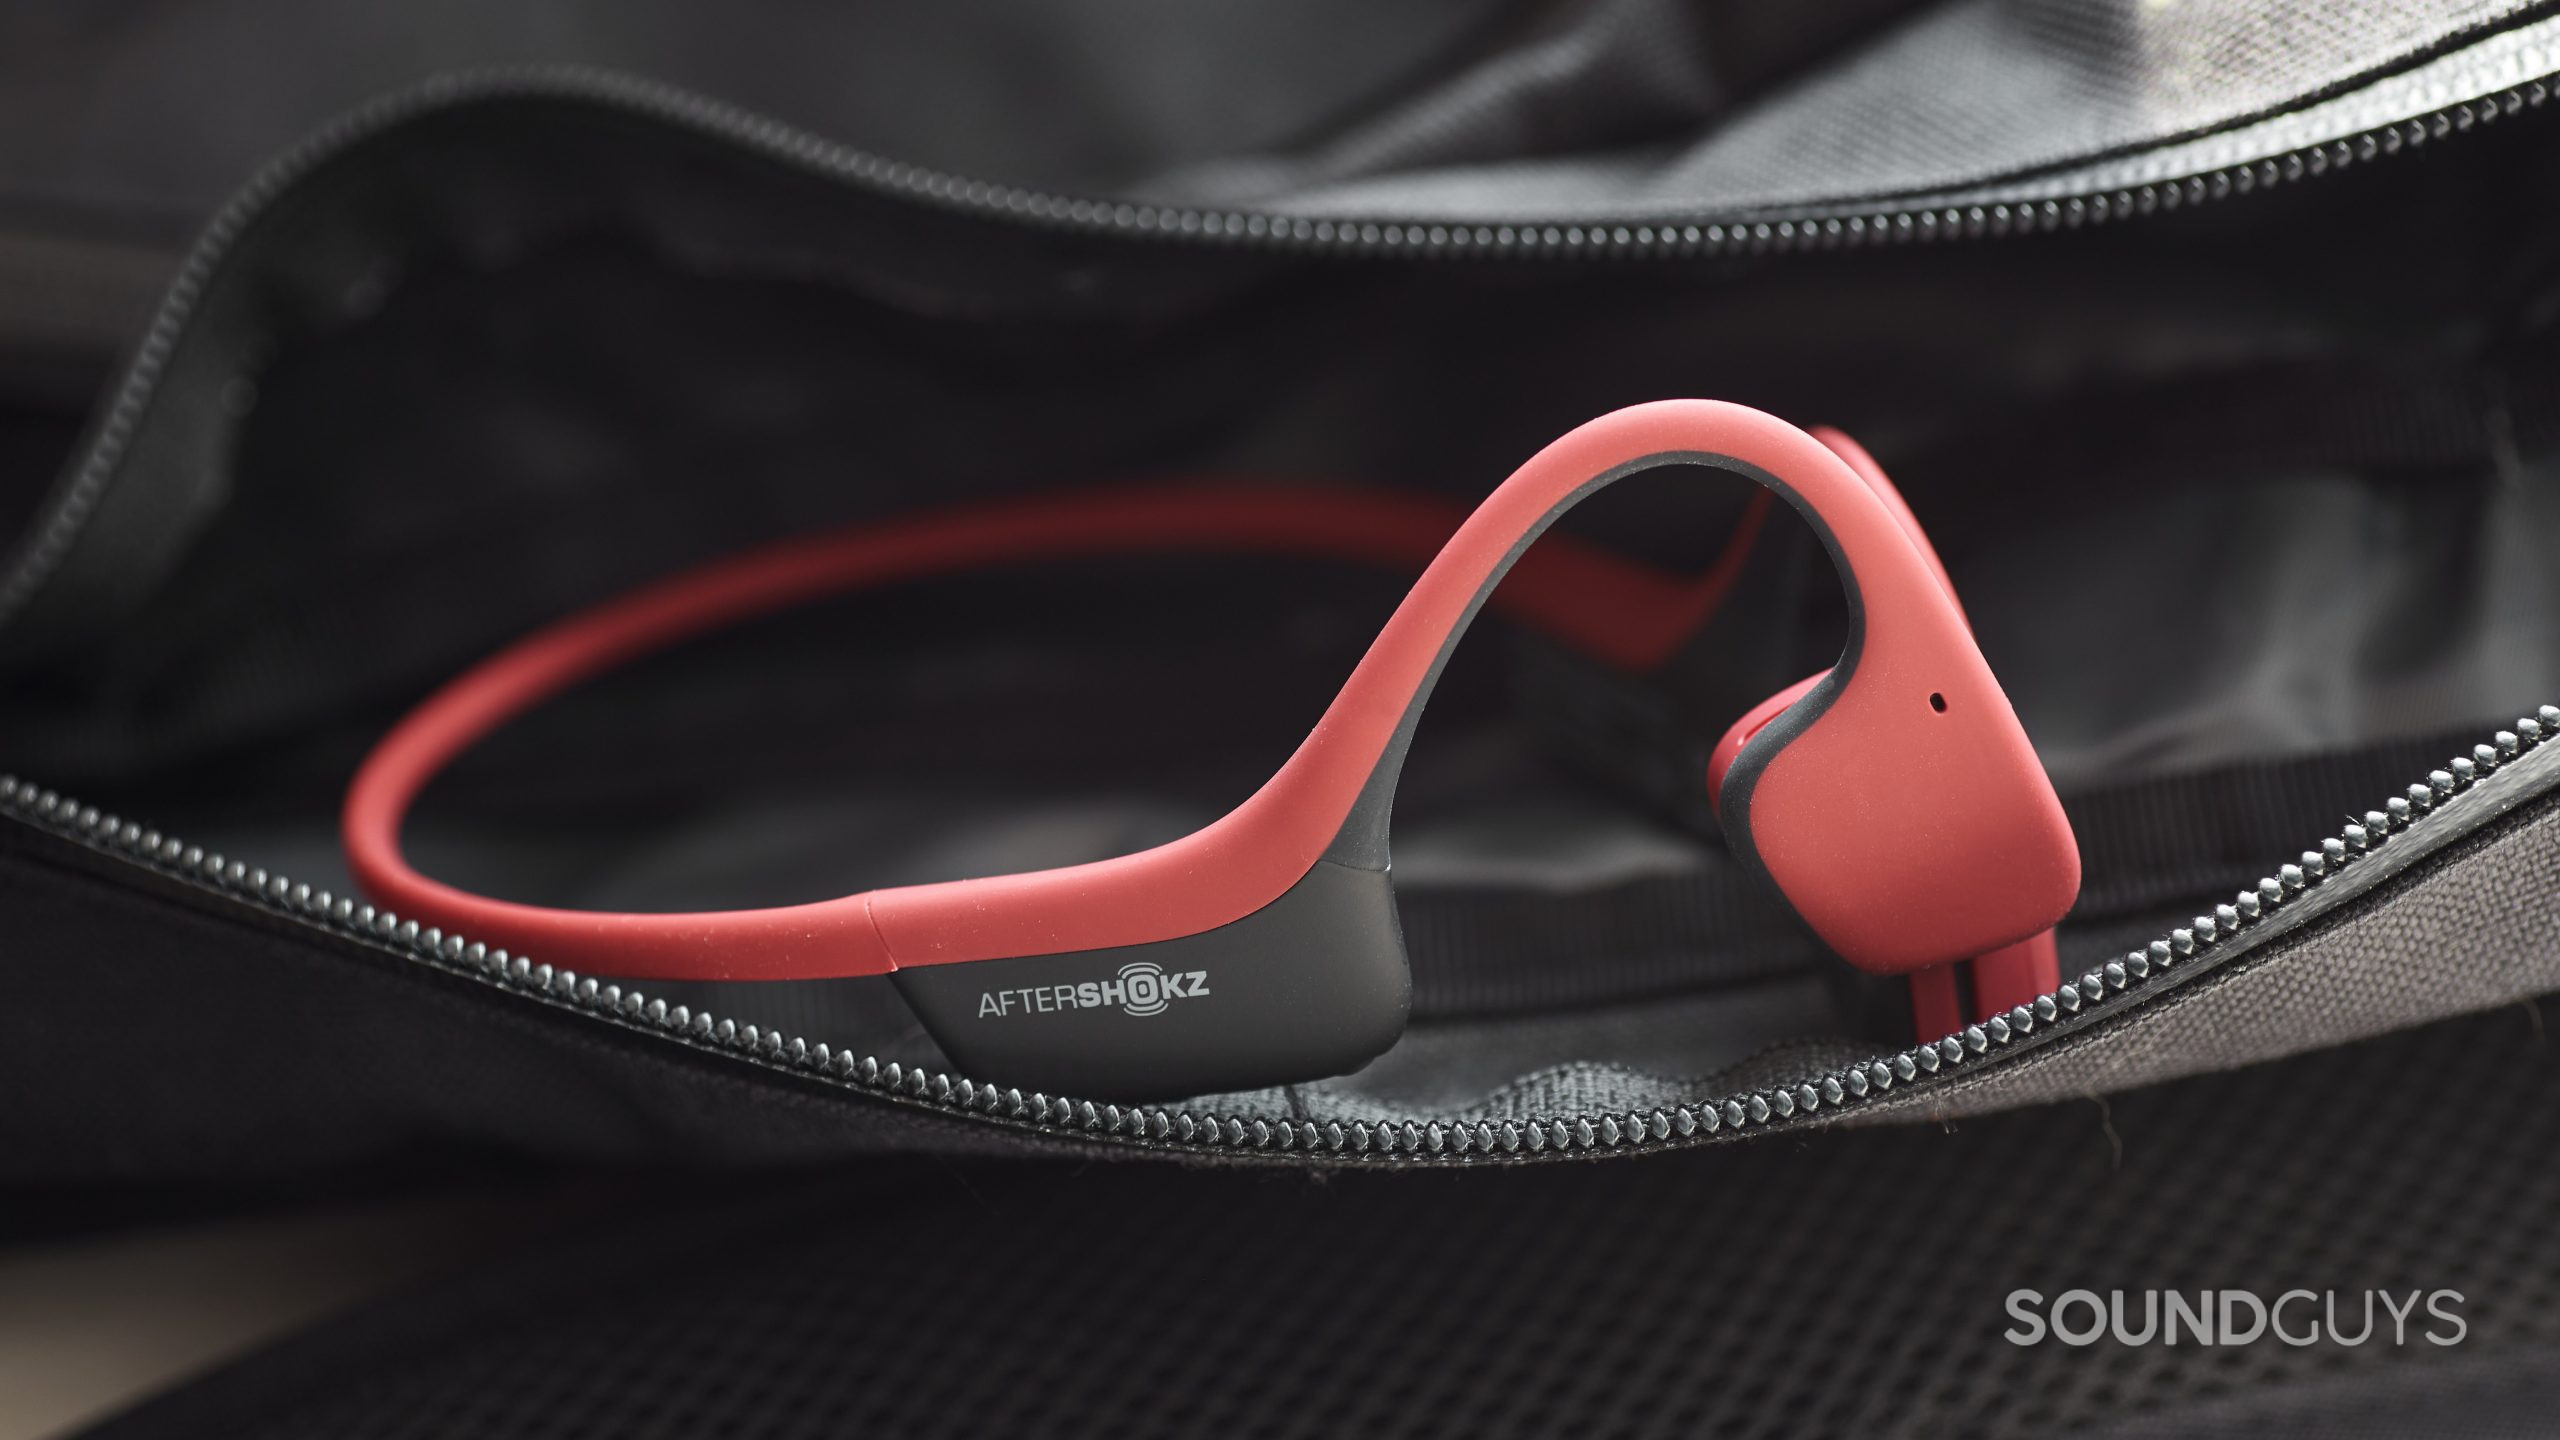 The AfterShokz Air bone conduction headphones in a zippered sling.